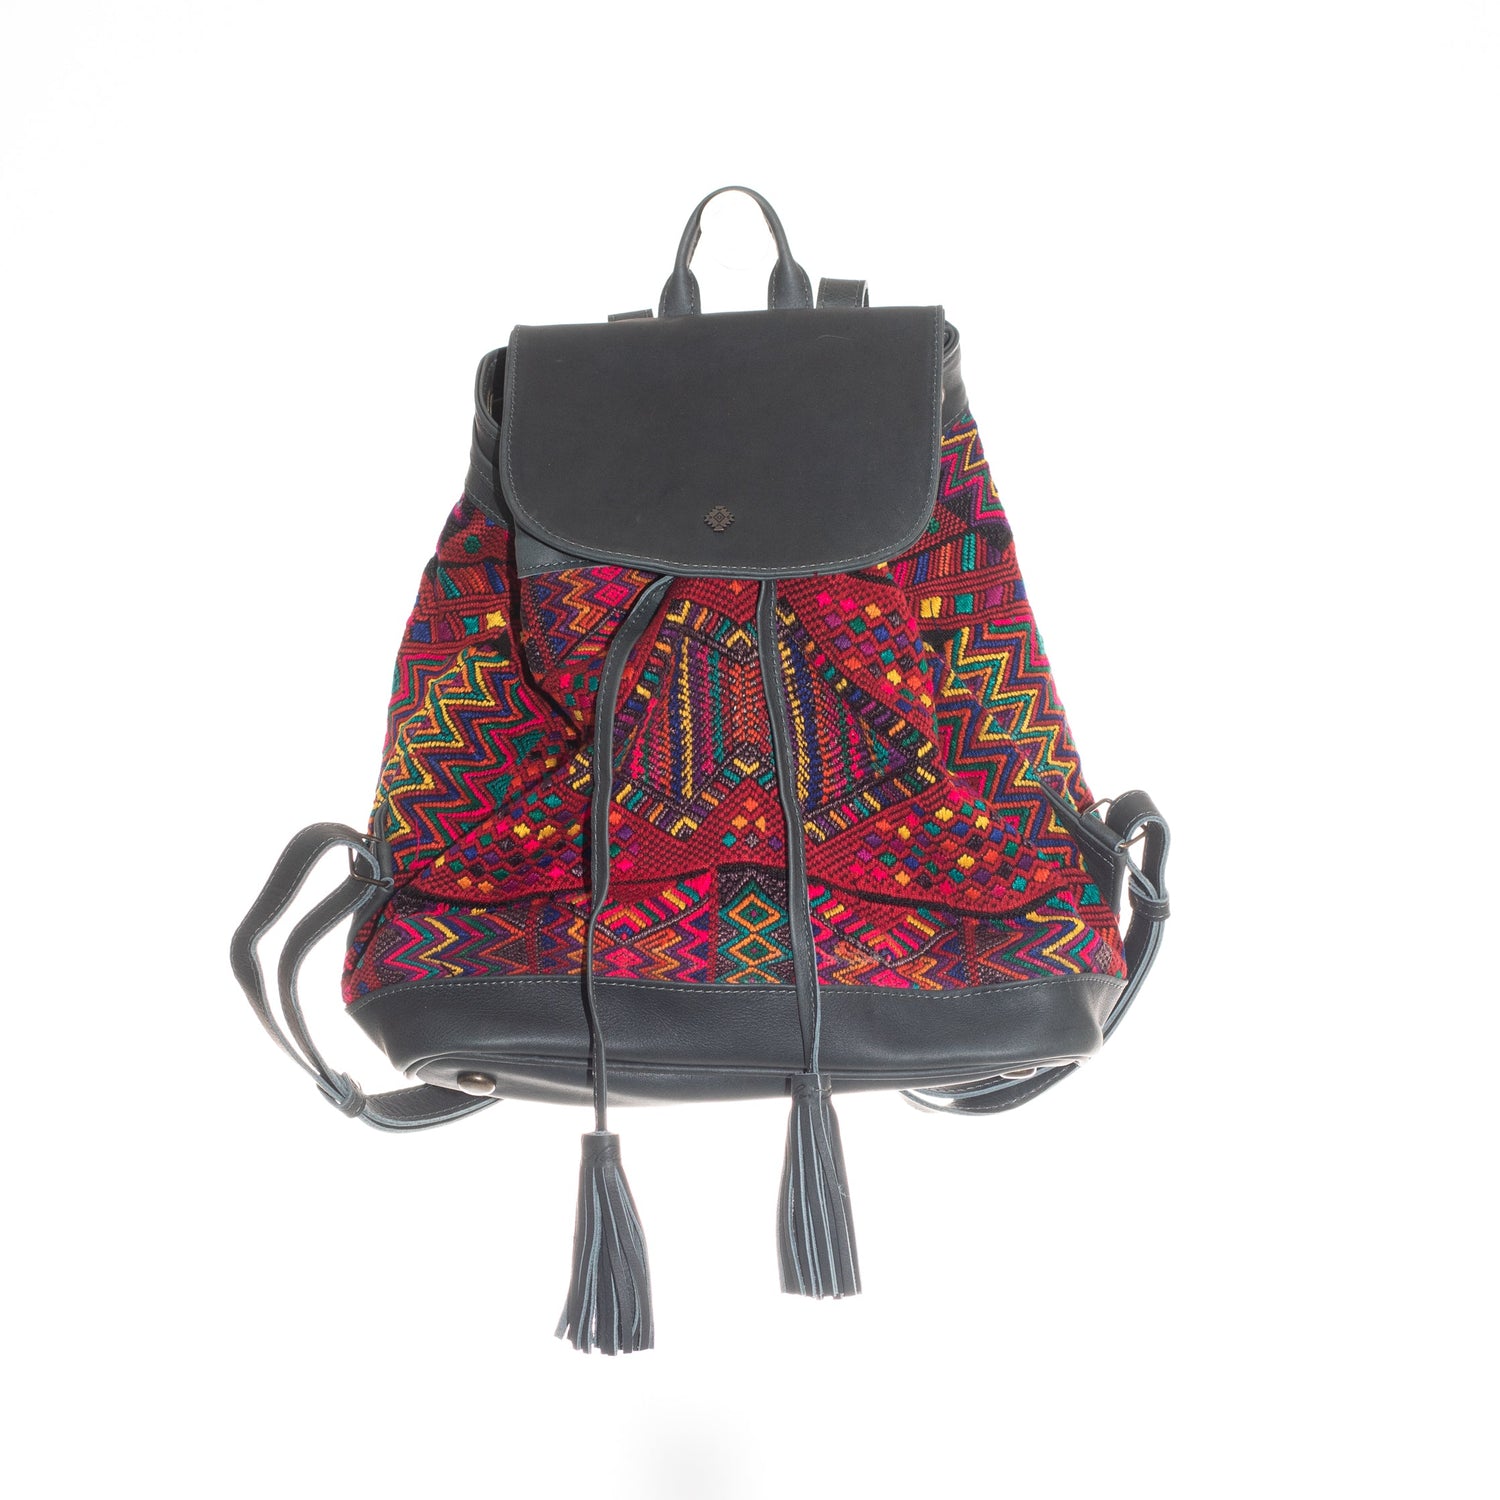 Under One Sky Butterfly-Print Backpack on SALE